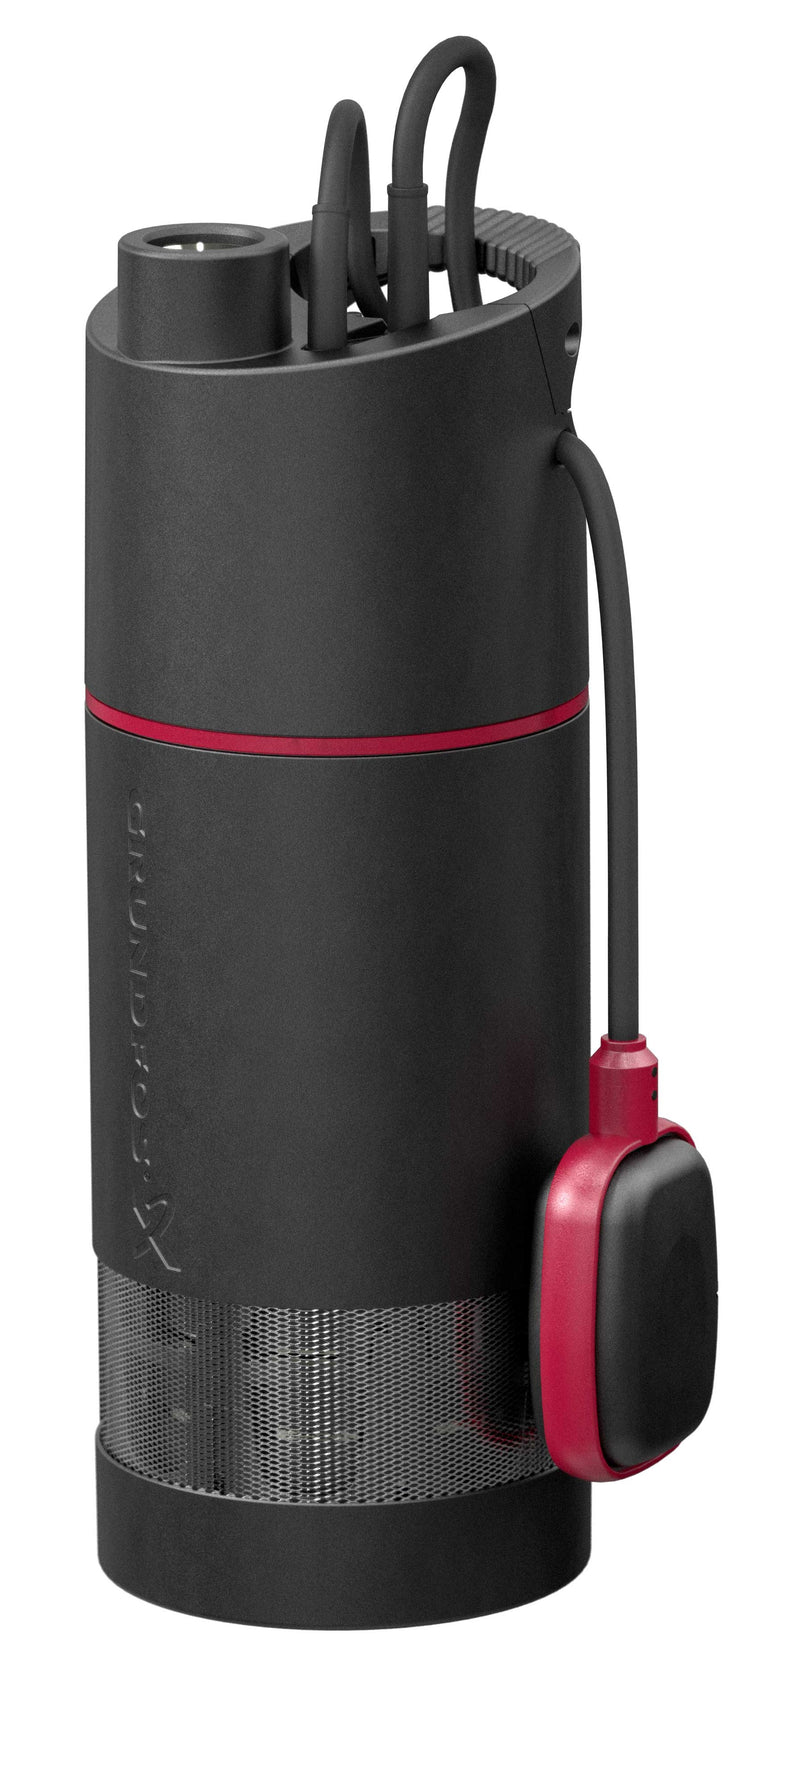 Grundfos SB3-35 .8kw Submersible Manual Pressure Pump with Float